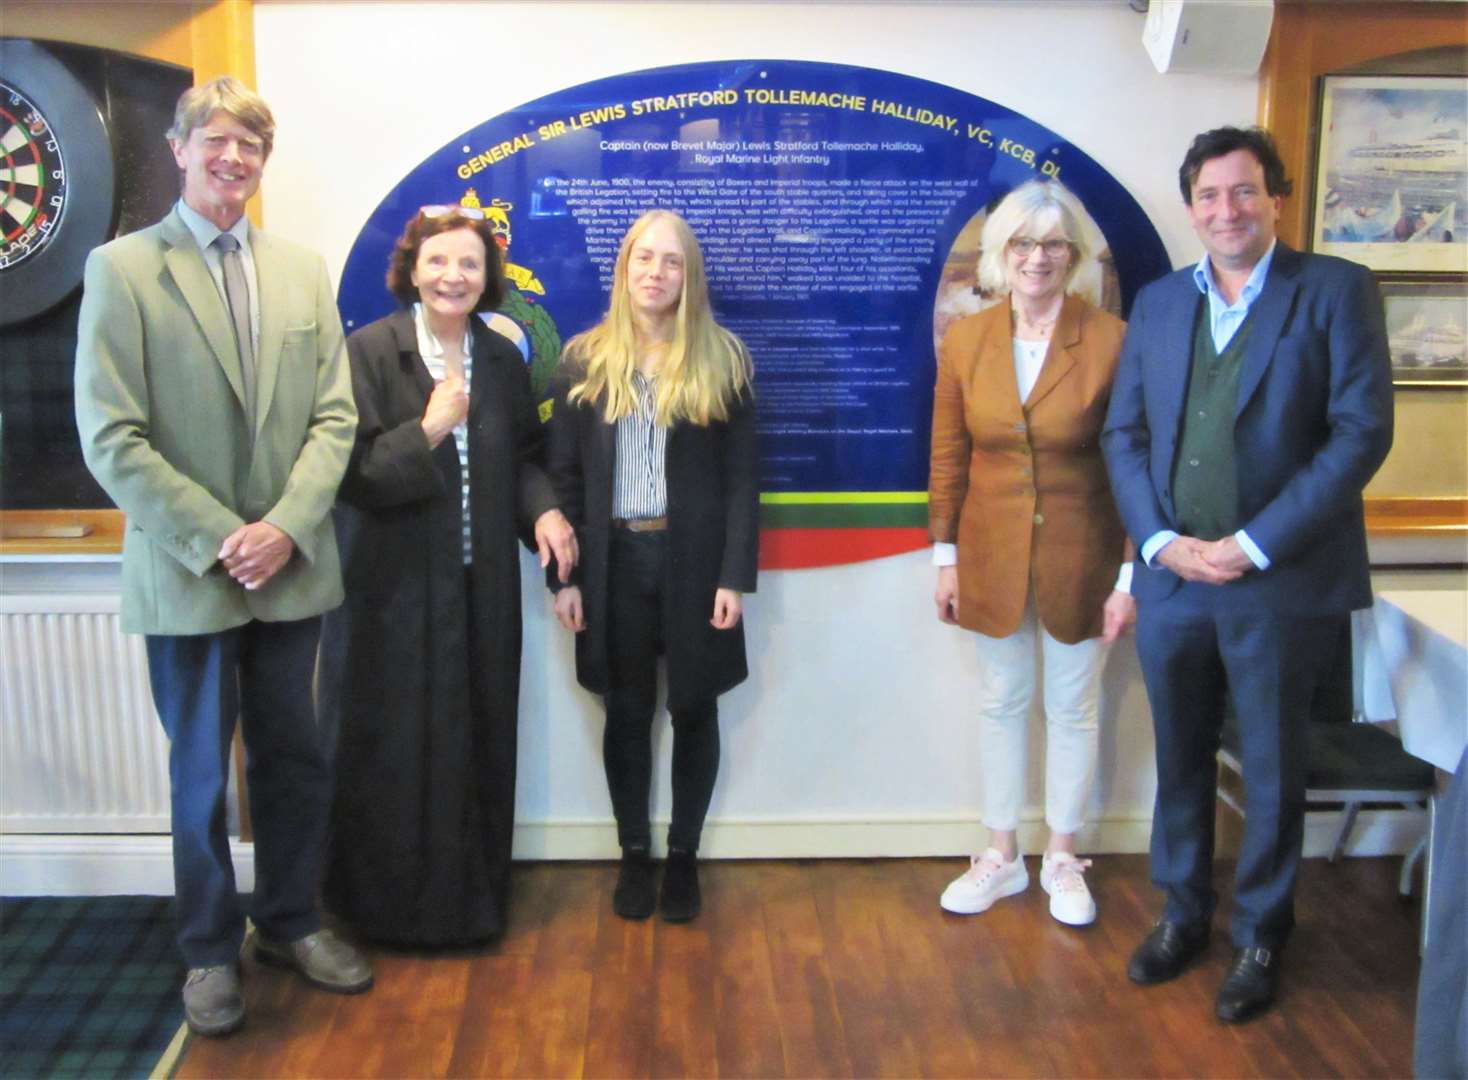 The family of Victoria Cross recipient General Sir Lewis Halliday, VC, KCB, DL, in front of the story board commissioned in his honour. Roger Halliday, his daughter Kathryn, and Halliday's grandaughters - first cousins to Roger; Alison Sutherland and Catriona Berrell (nee Sutherland) and her husband Sean